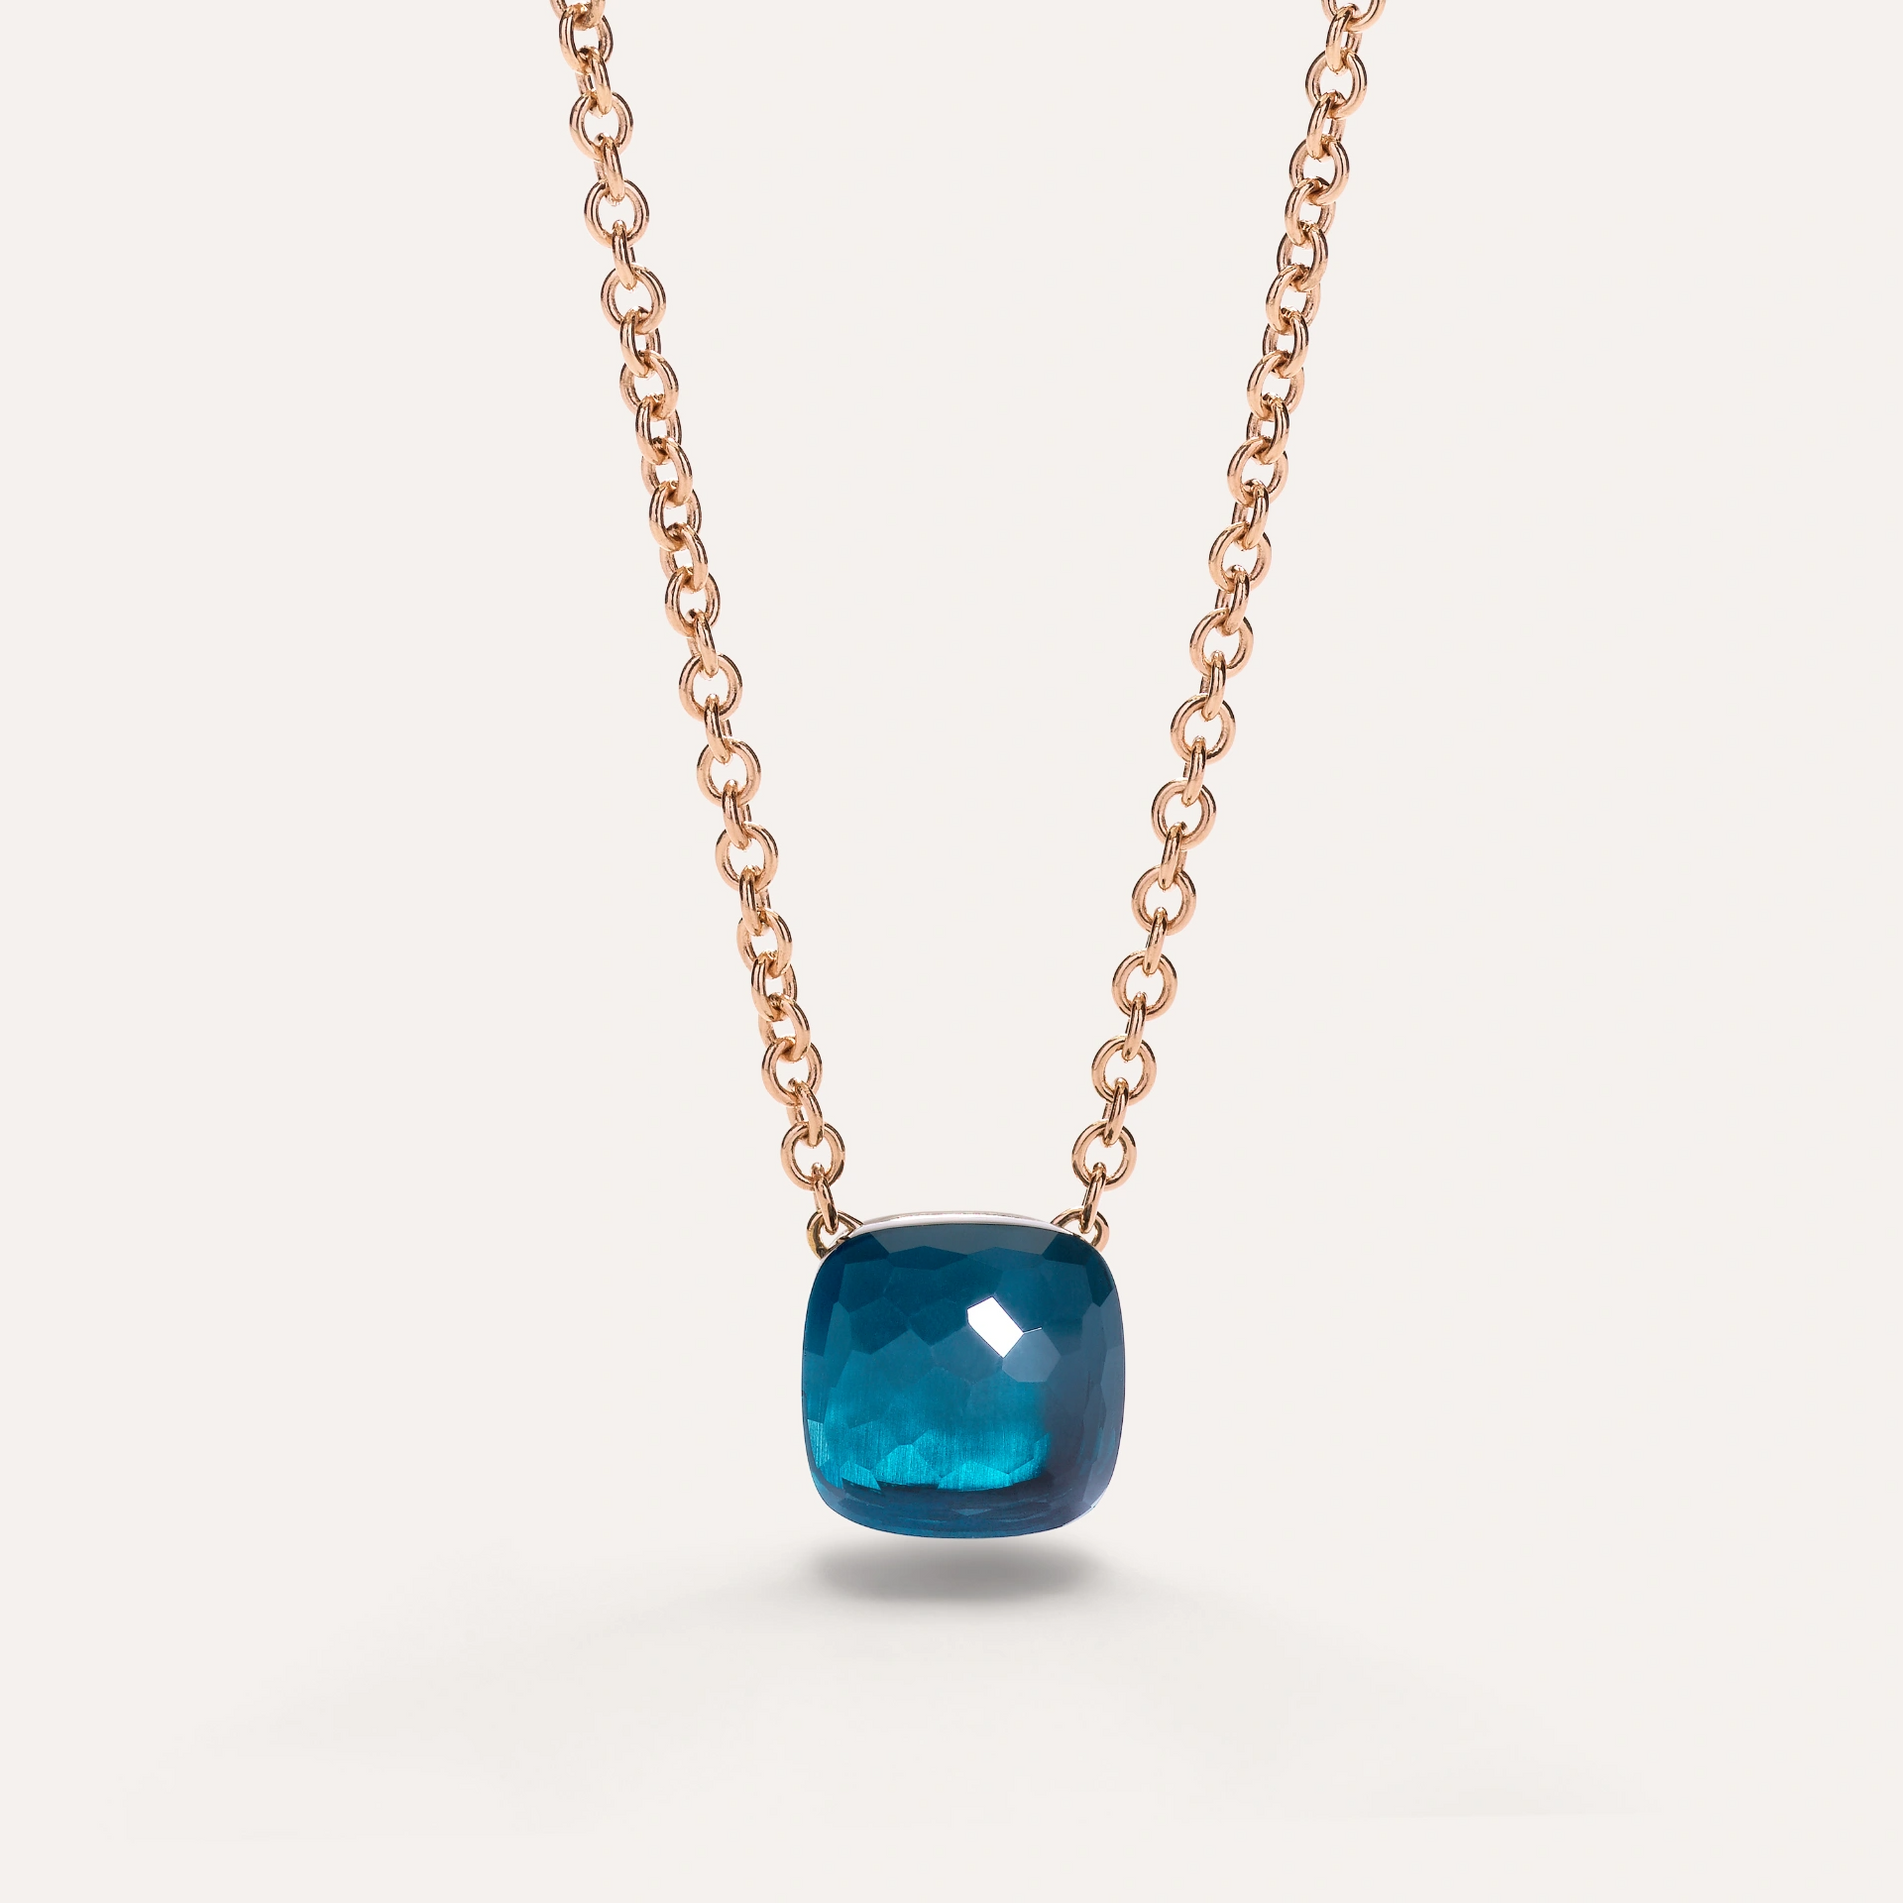 Pomellato Nudo Necklace with Large Pendant, 18k Gold and Blue Topaz - Orsini Jewellers